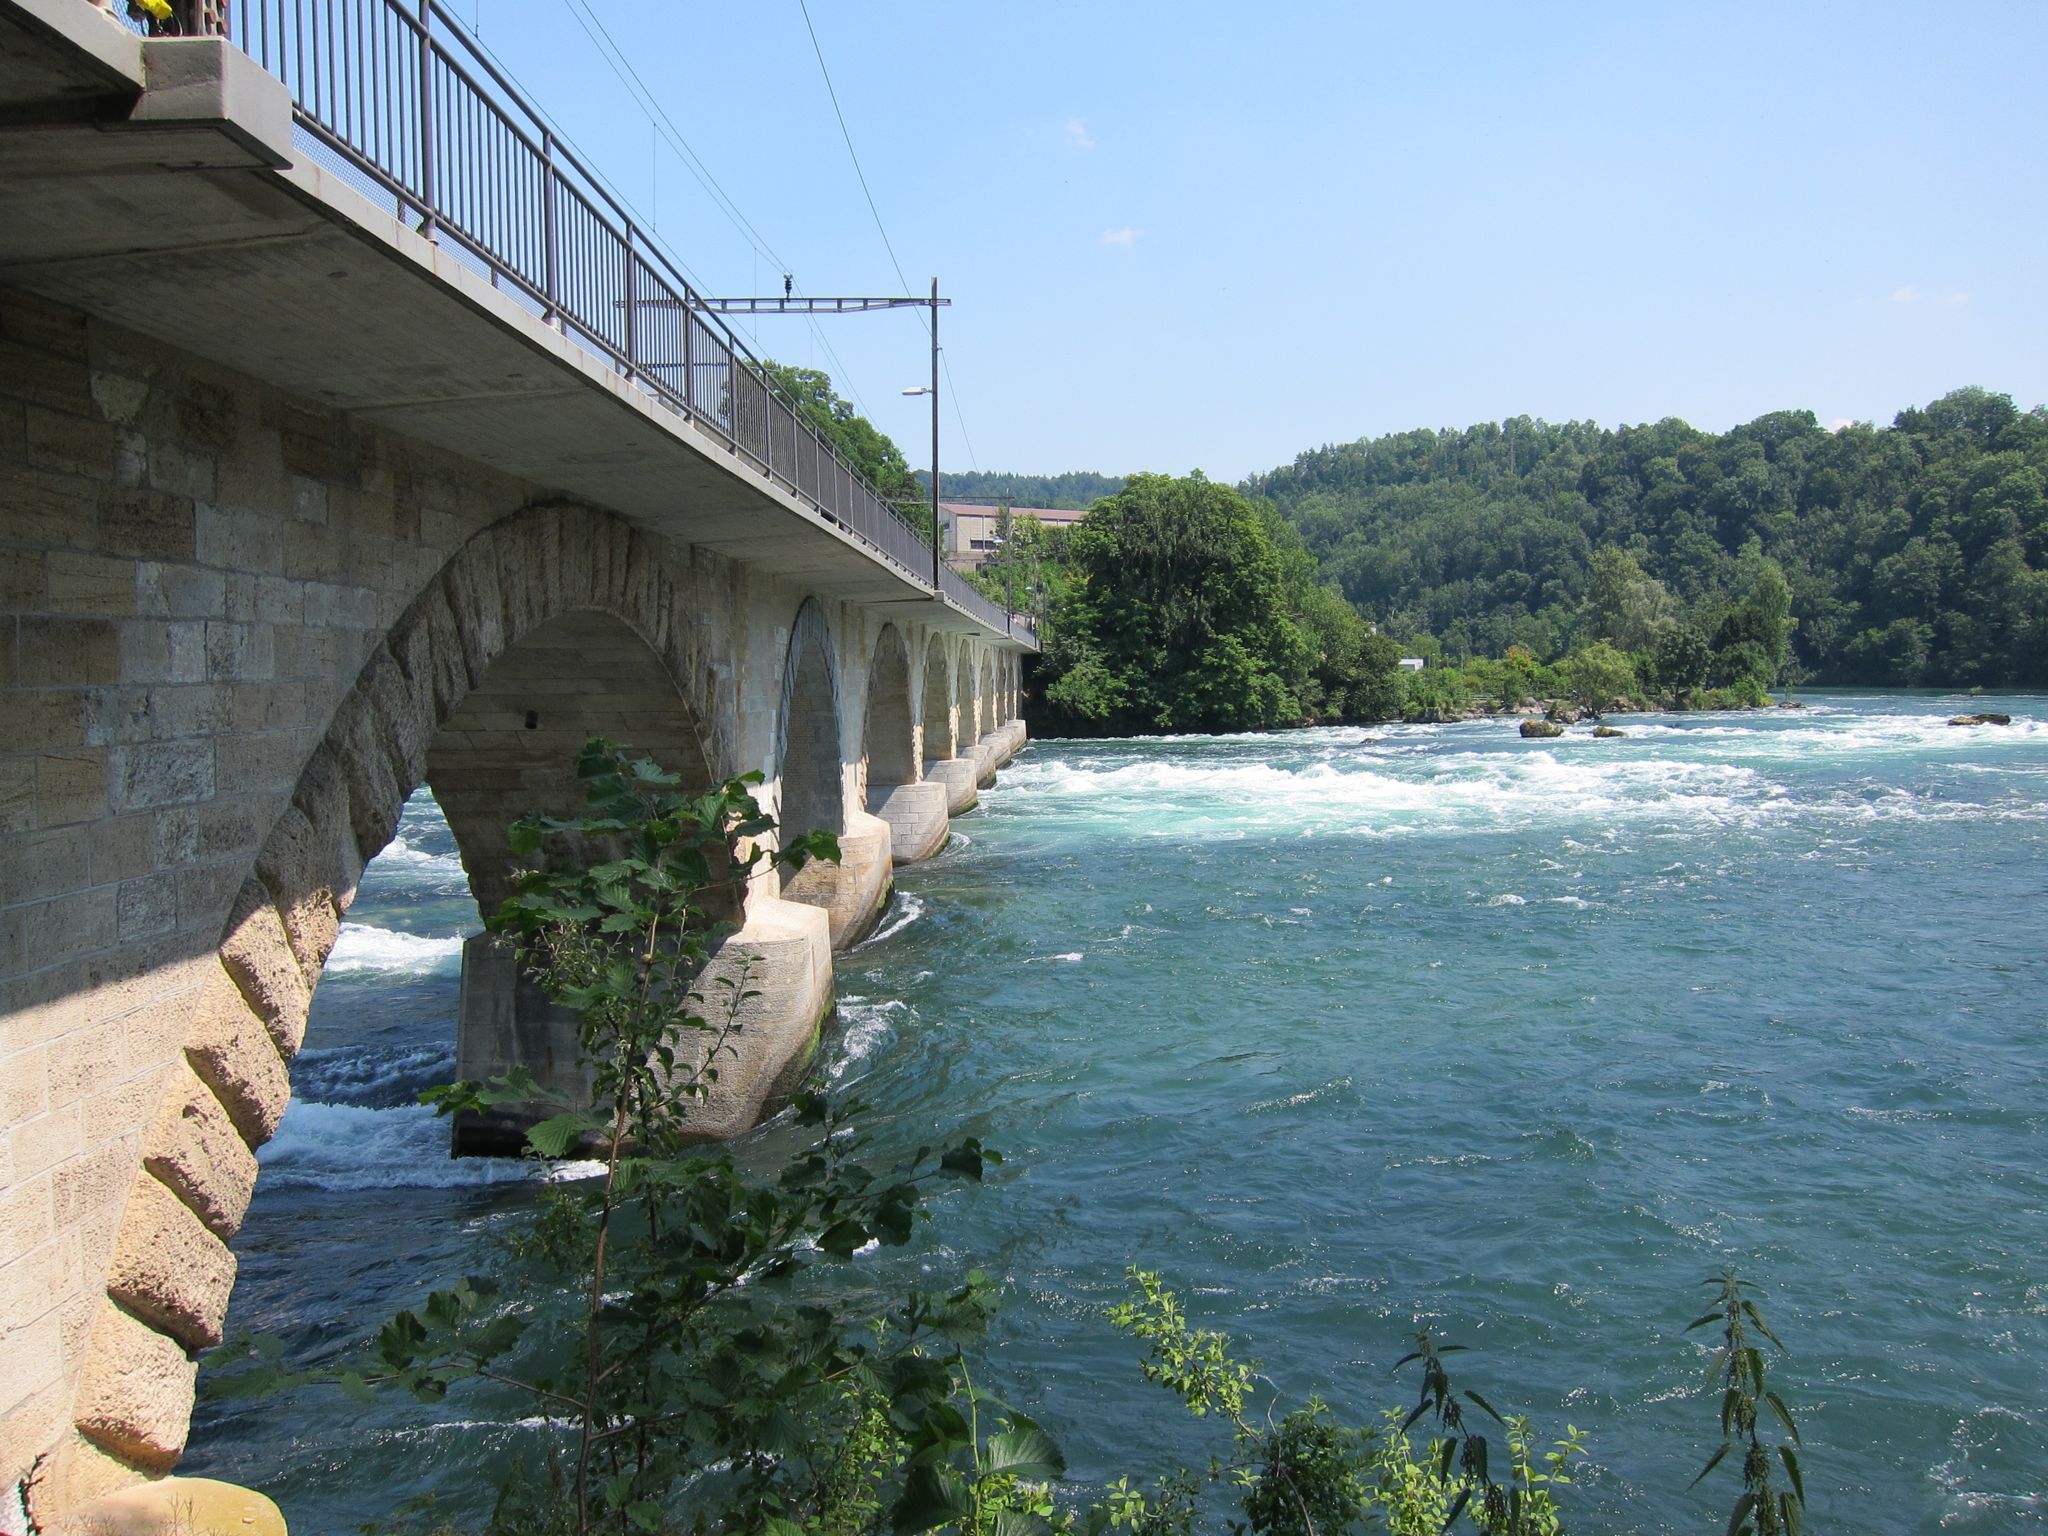 Photo 14 of 22 from the album Rheinfall.